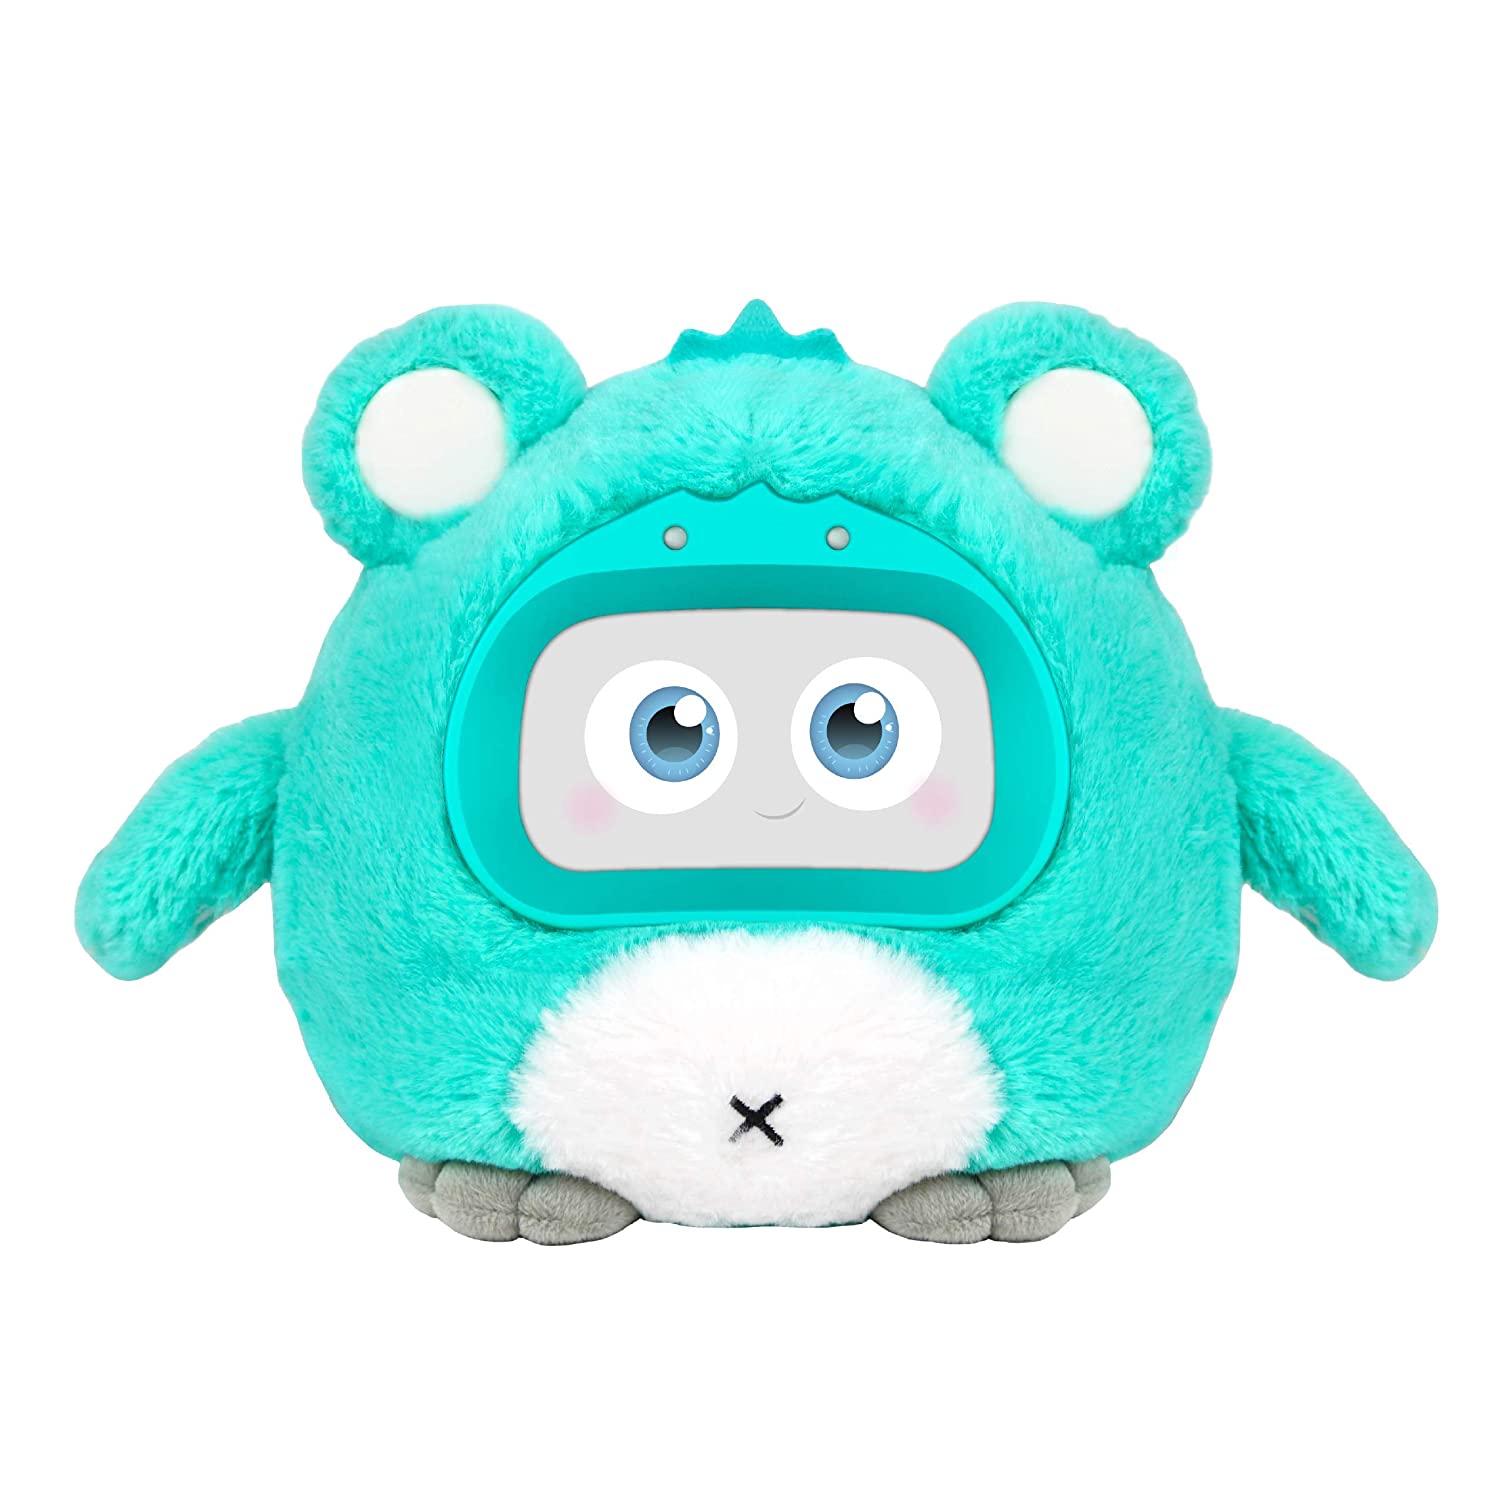 Woobo Minty Marshmallow - Interactive Robot for Curious Kids